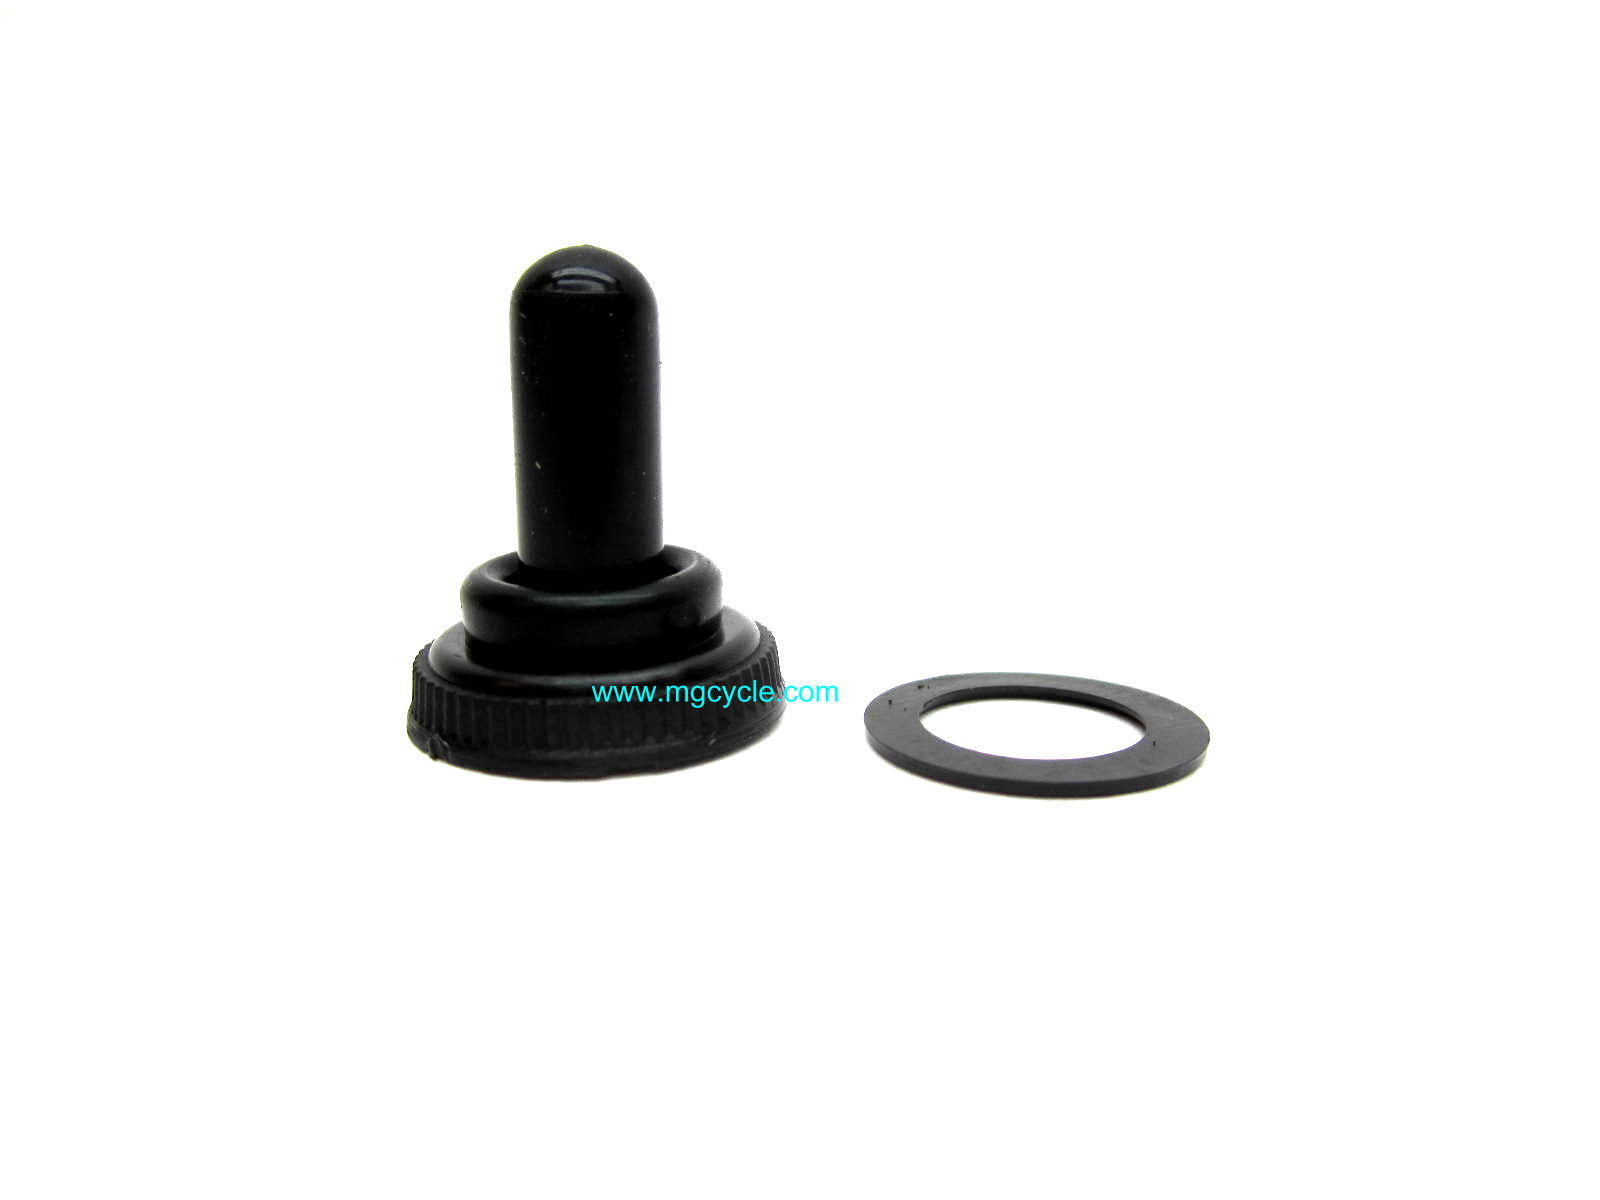 Rubber cap for toggle switch, Convert, G5, T3 Police instrument - Click Image to Close